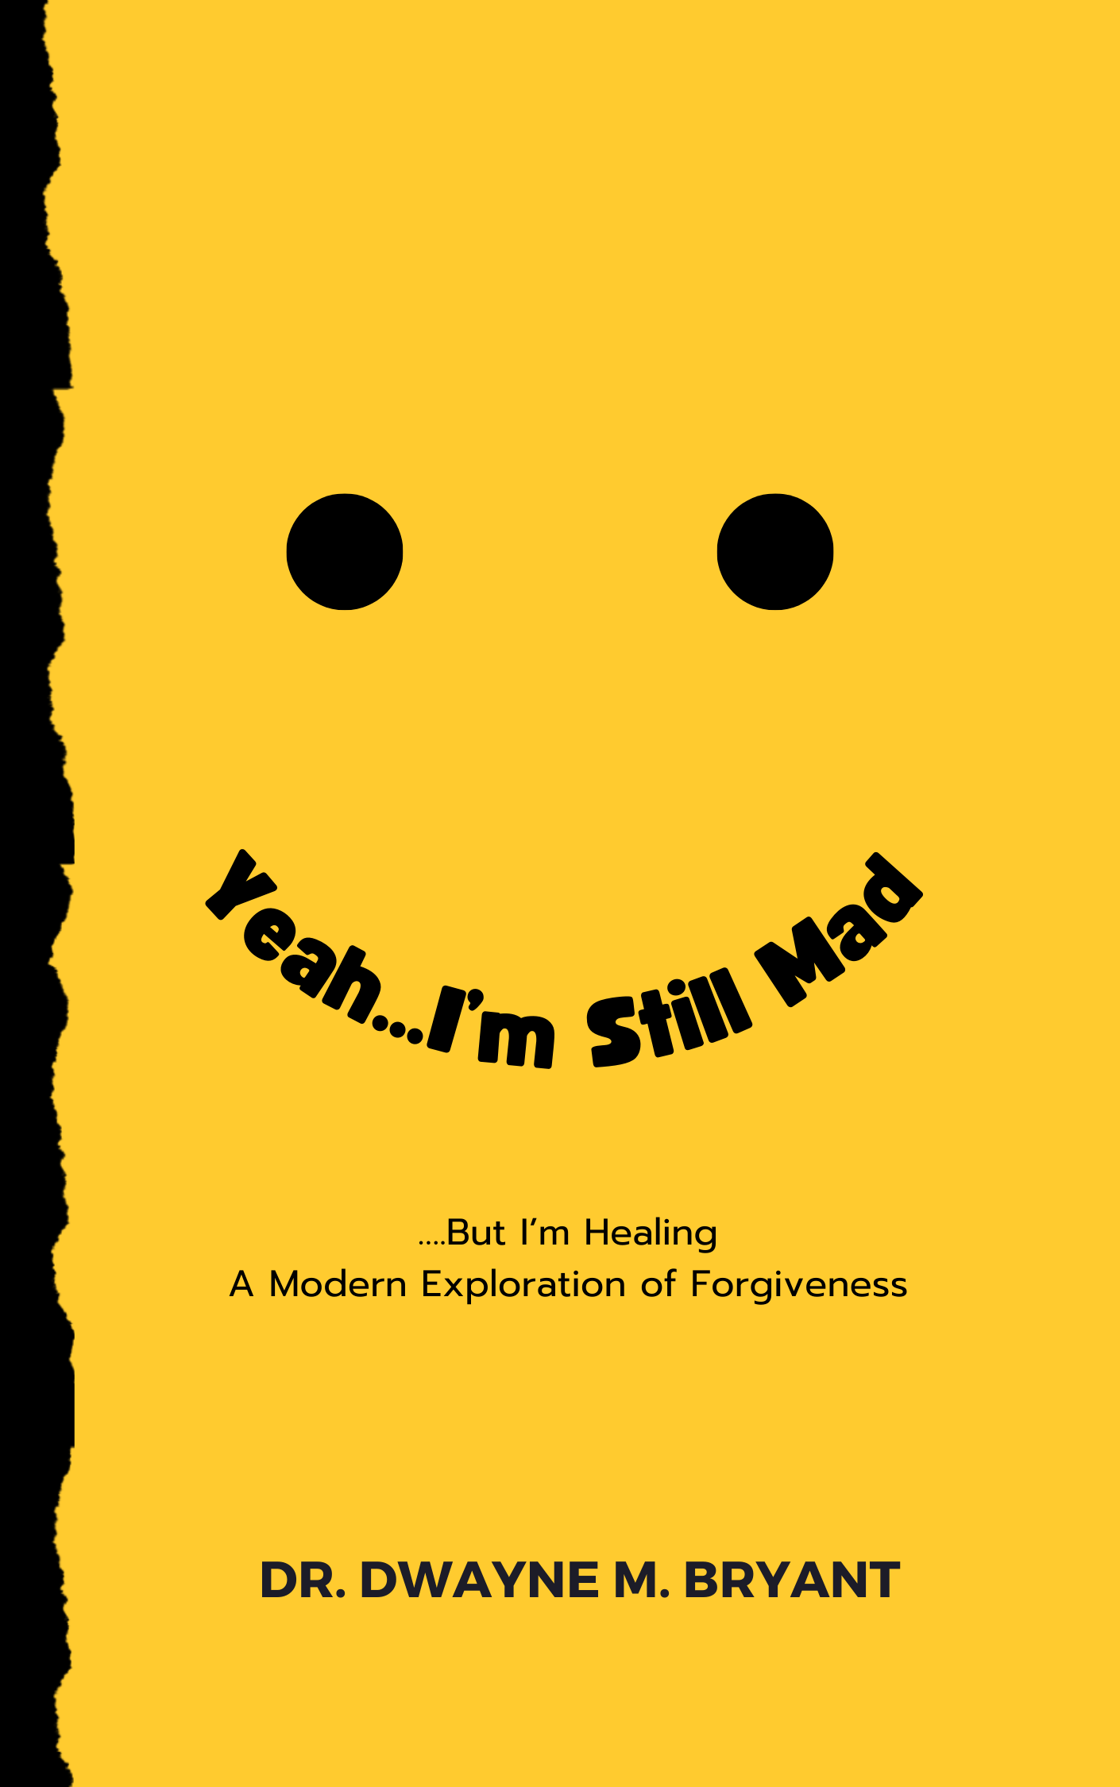 Image of Yeah I’m Still Mad...But I'm Healing A Modern Exploration of Forgiveness